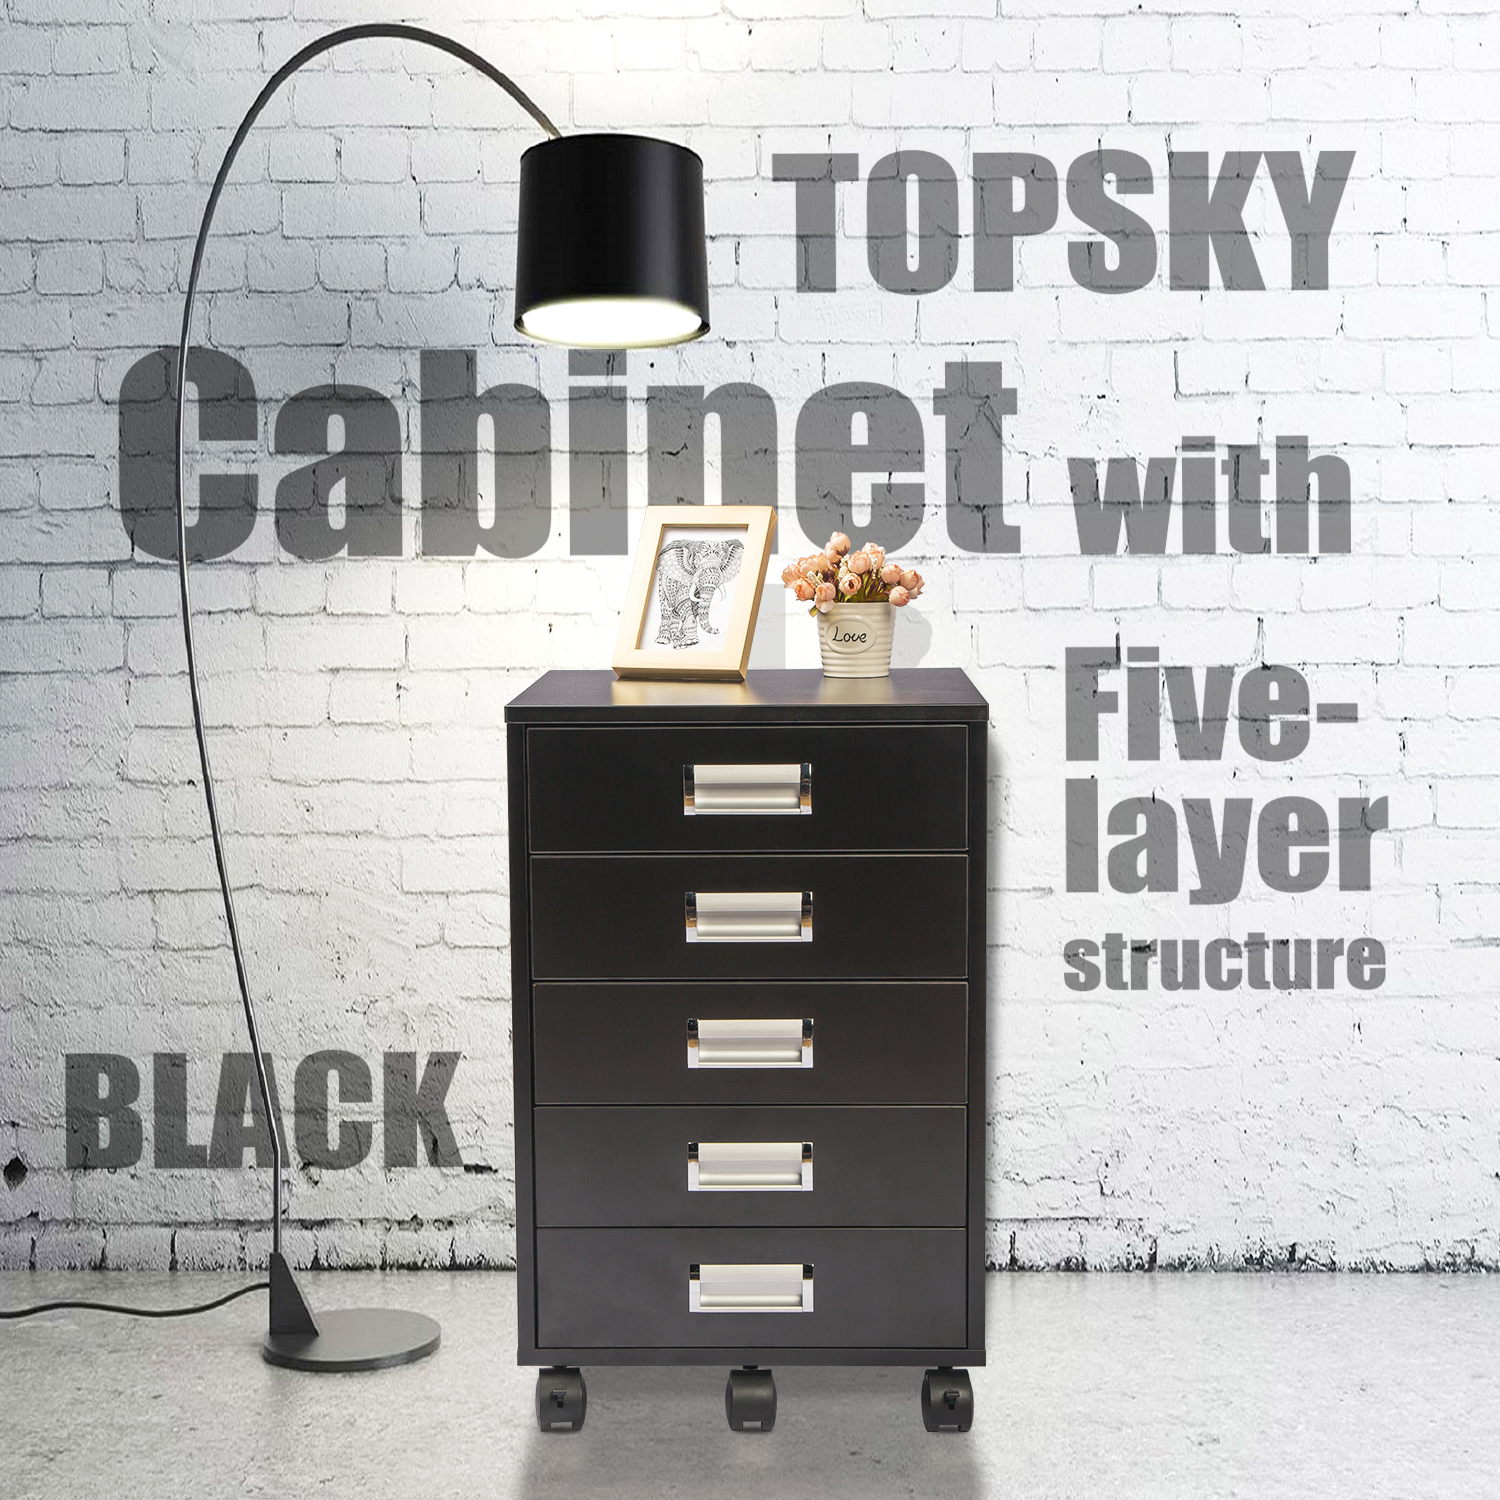 White TOPSKY 5 Drawer Mobile Cabinet Fully Assembled Except Casters Built-in Handle